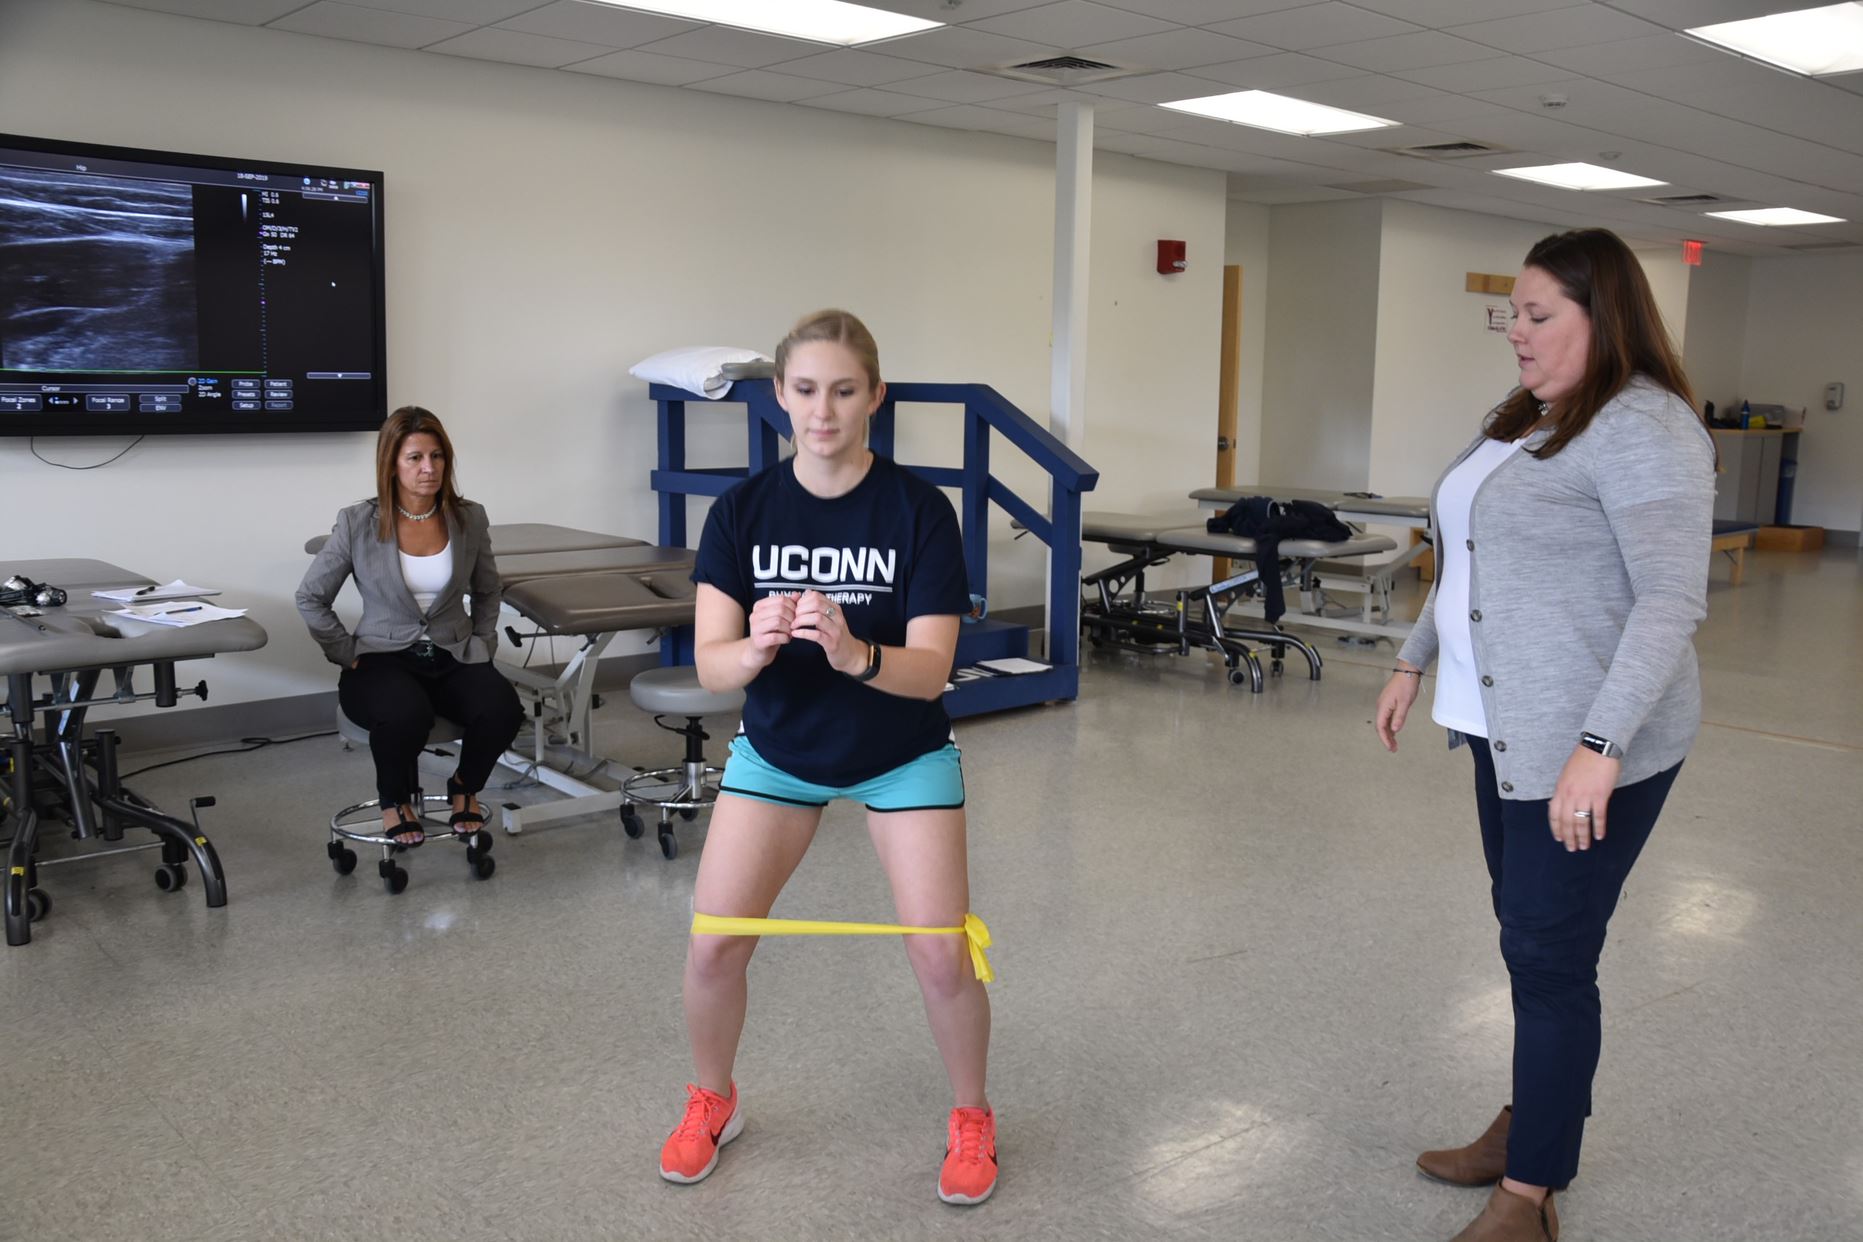 demonstrating a physical therapy exercise with faculty supervision